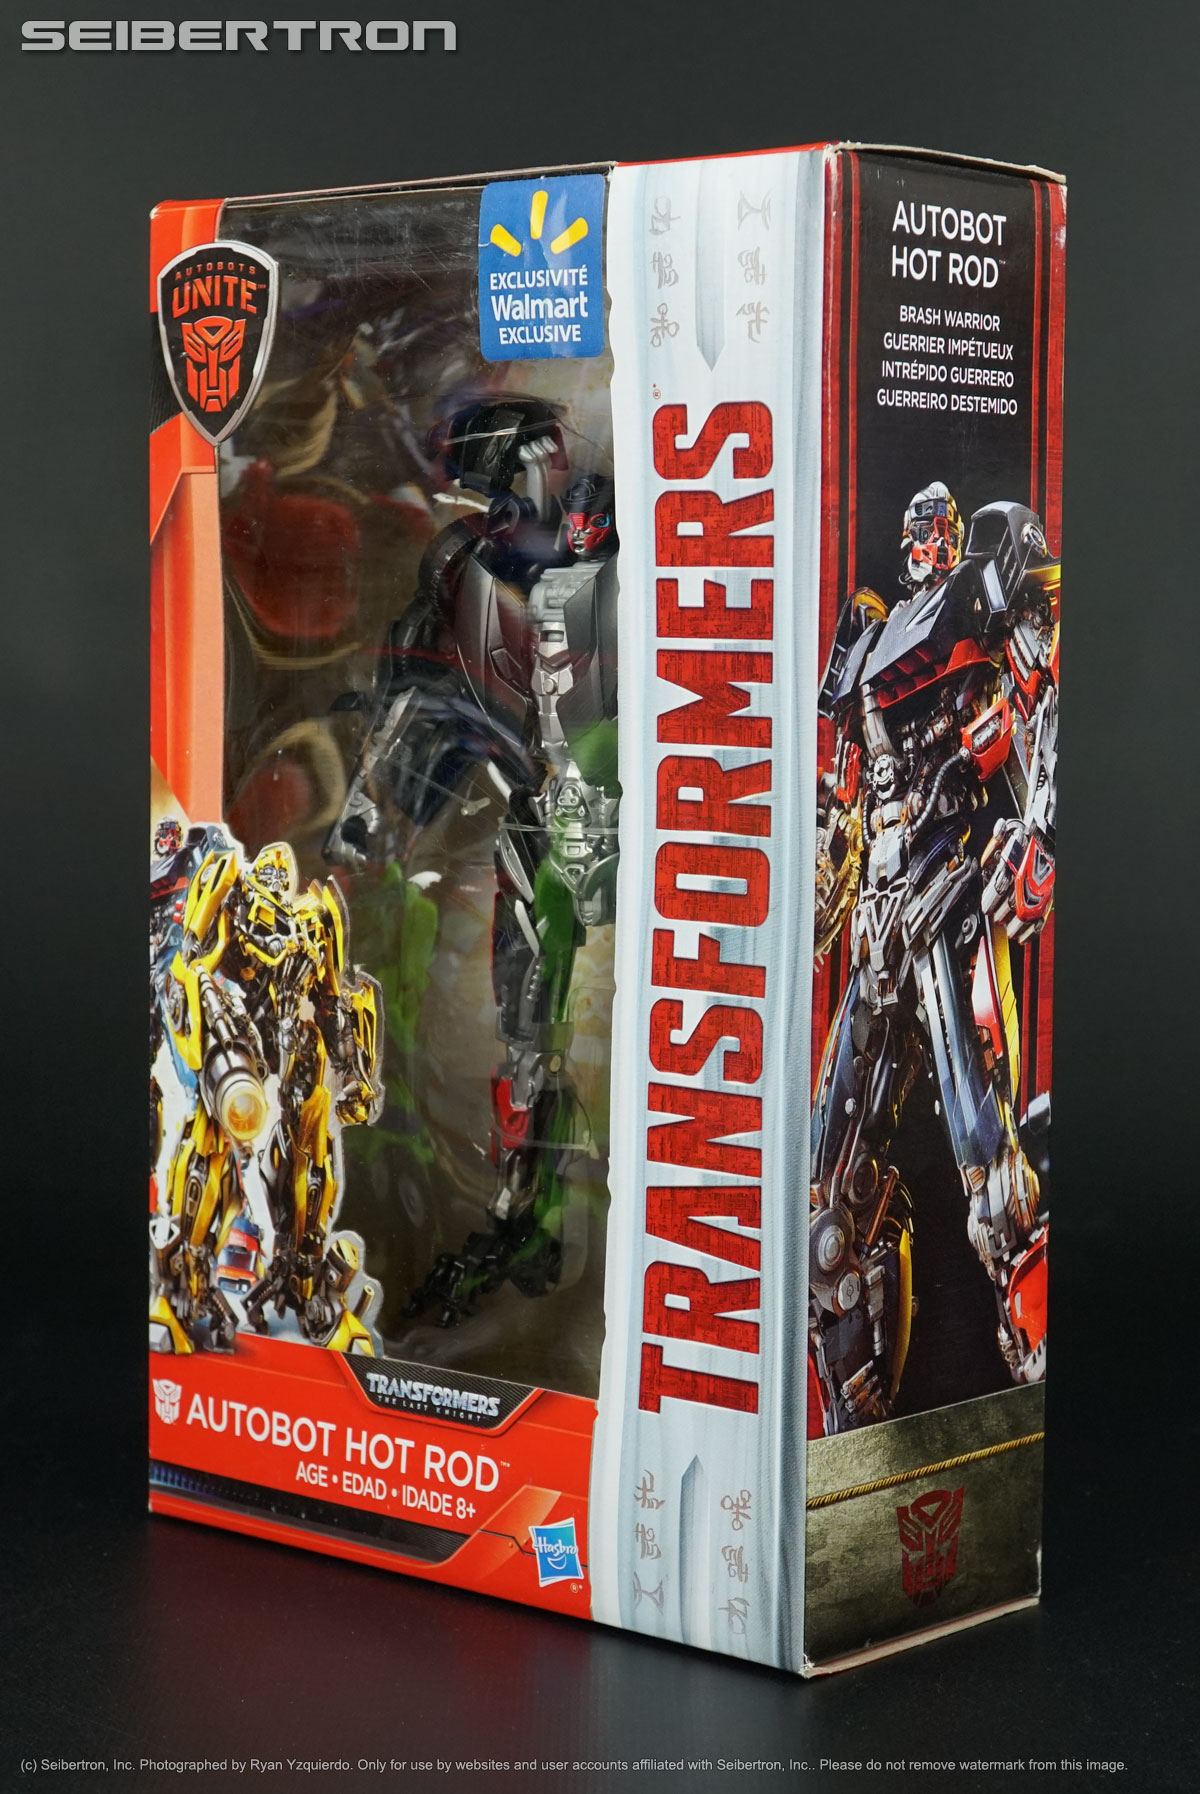 Transformers, Masters of the Universe, Teenage Mutant Ninja Turtles, Gobots, Comic Books, Shopkins, and other listings from Seibertron.com: Deluxe Class HOT ROD Transformers The Last Knight Autobots Unite Hasbro New 2017 Walmart Exclusive